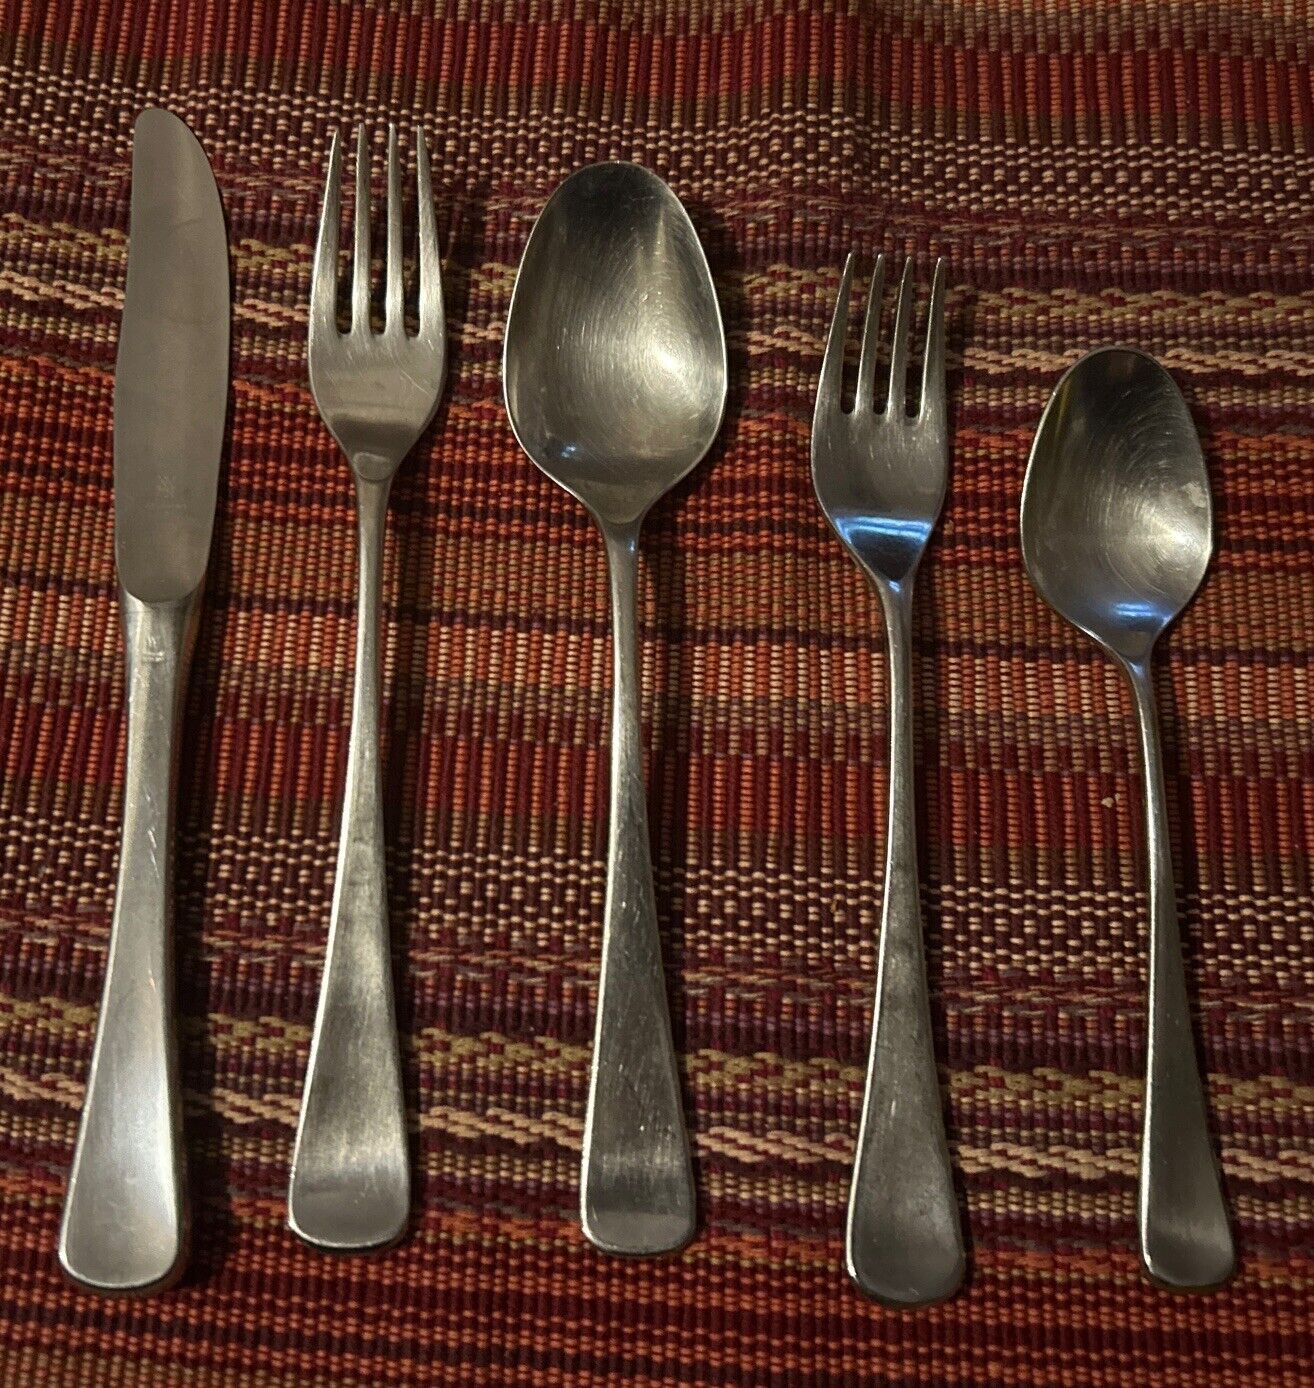 5 Pc Place Setting WMF CROMARGAN FINESSE Germany Stainless Flatware VC